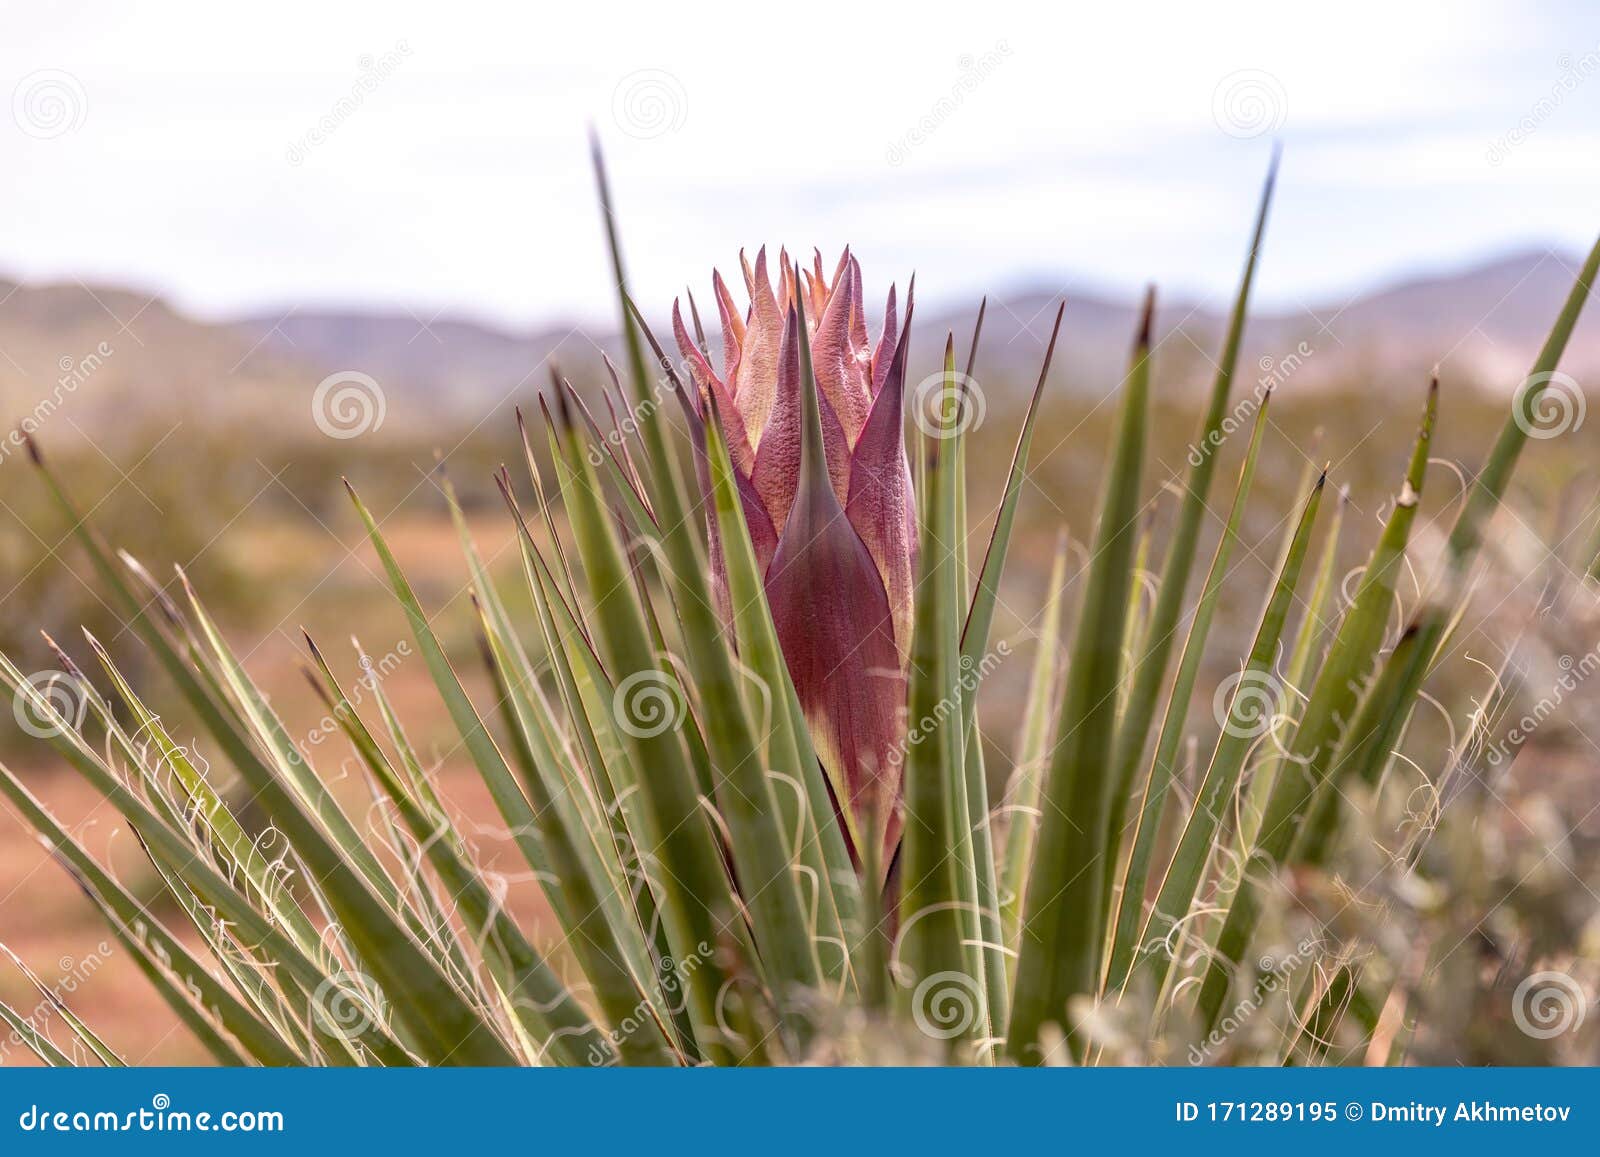 up close photo of a mojave yucca flower ready to bloom.